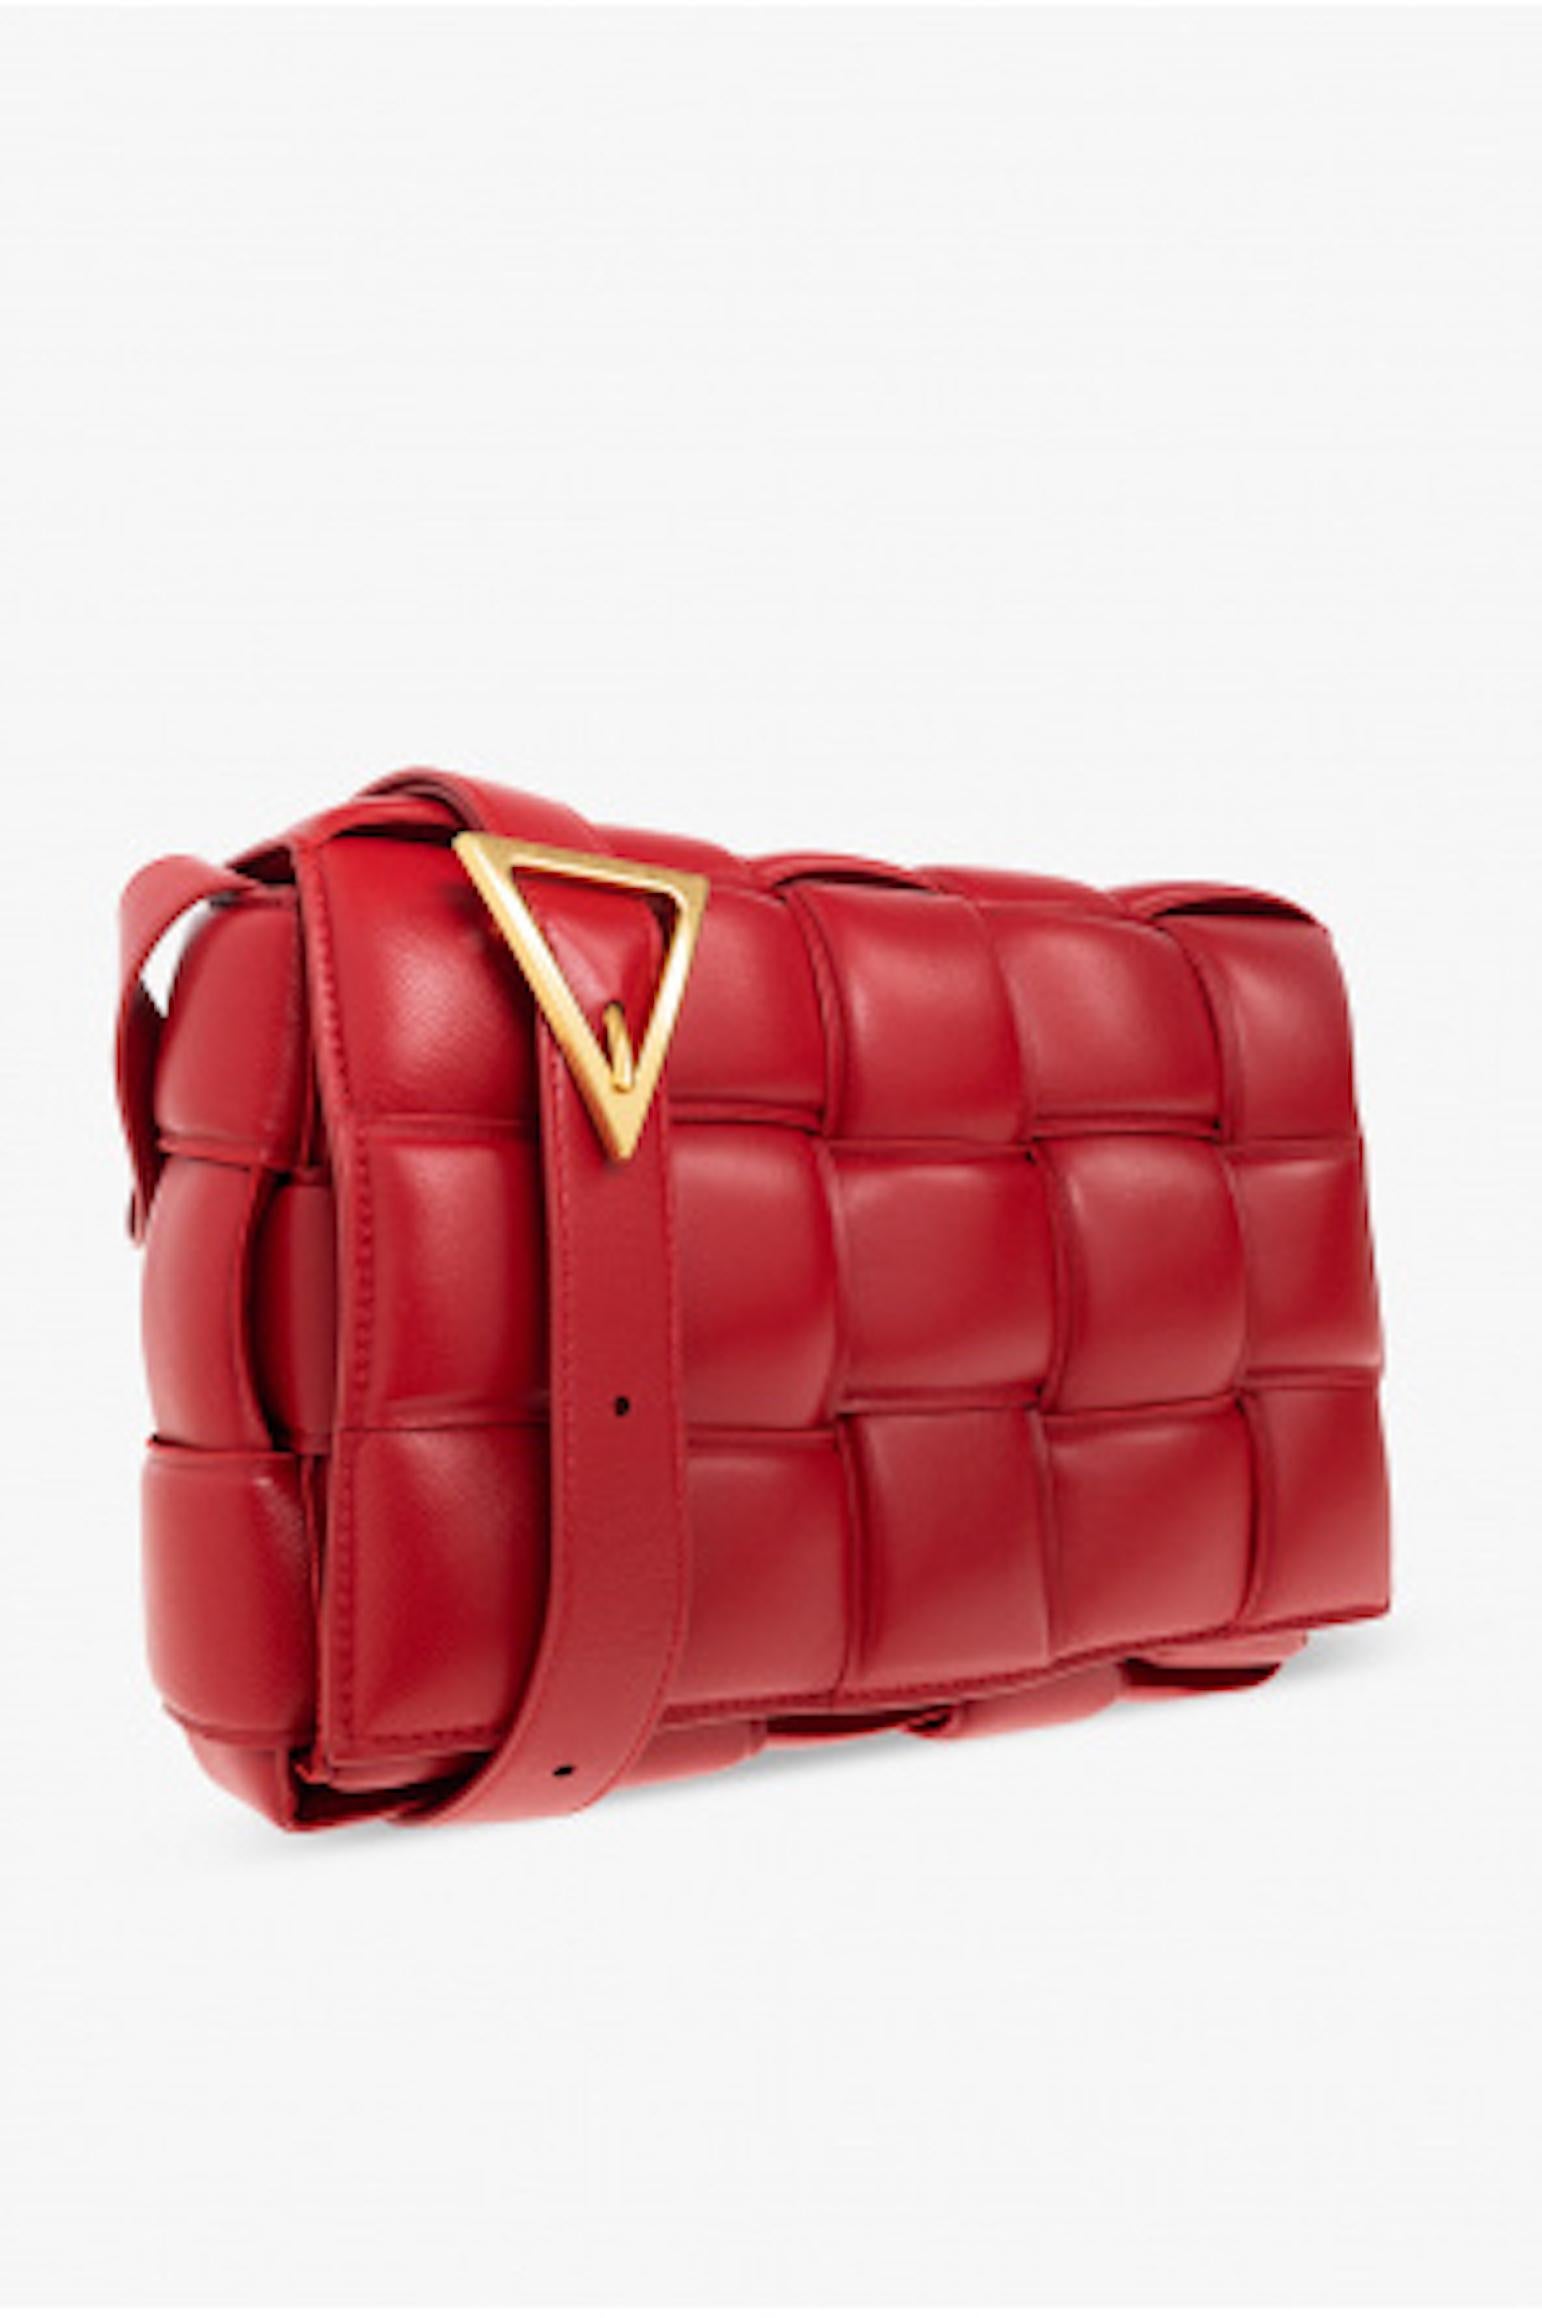 Bottega Veneta Padded Cassette in Apple Candy  In New Condition For Sale In Paradise Island, BS